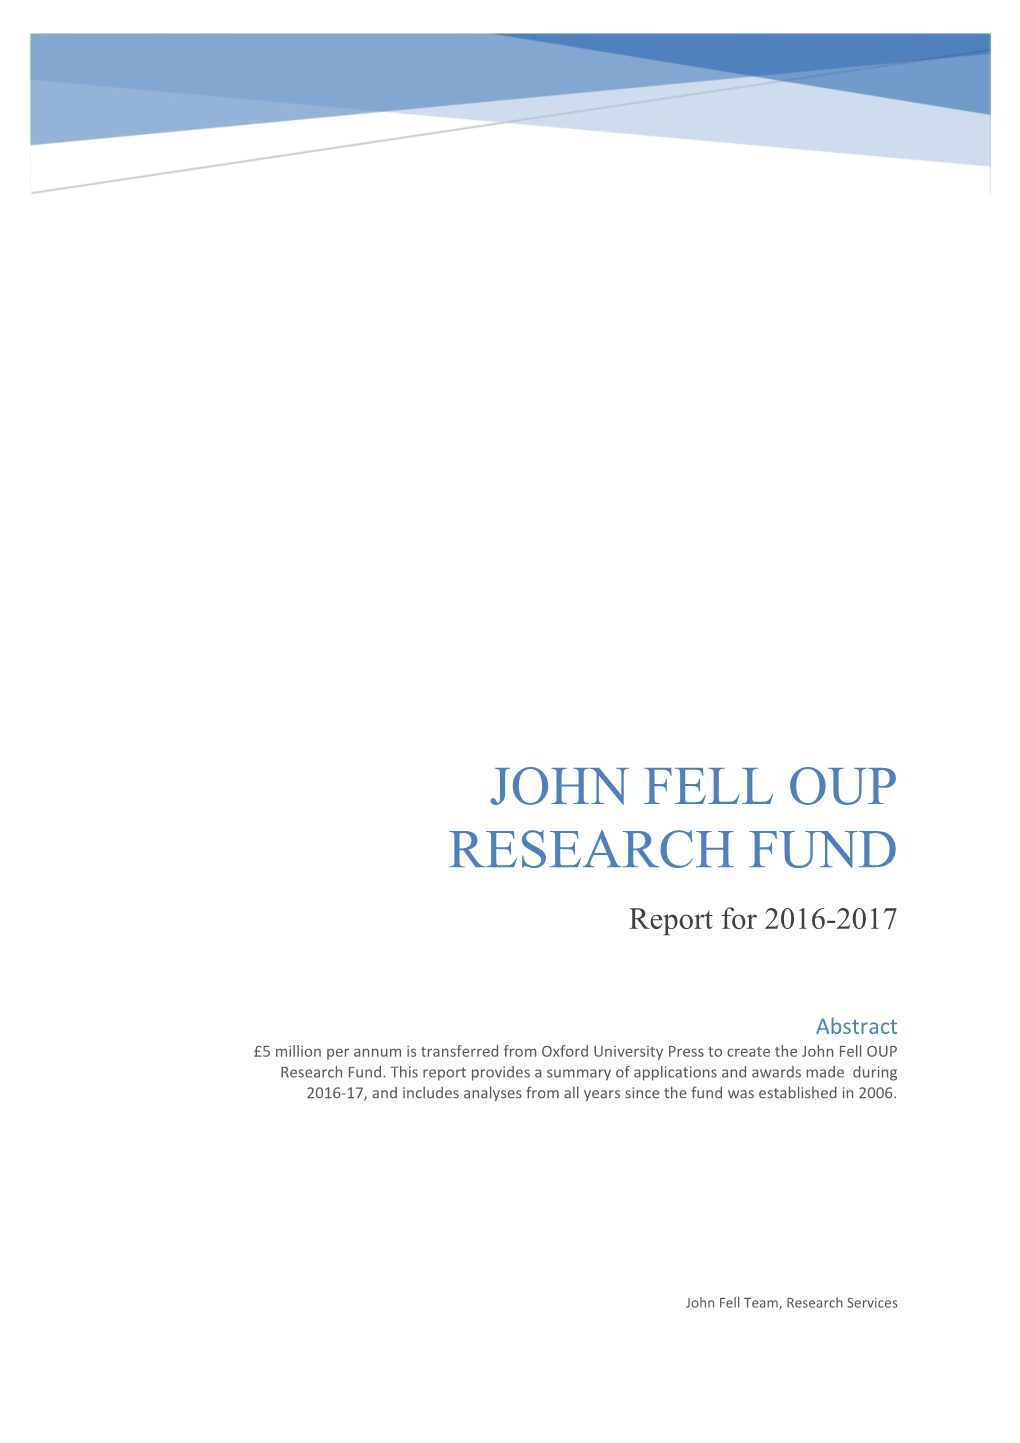 JOHN FELL OUP RESEARCH FUND Report for 2016-2017